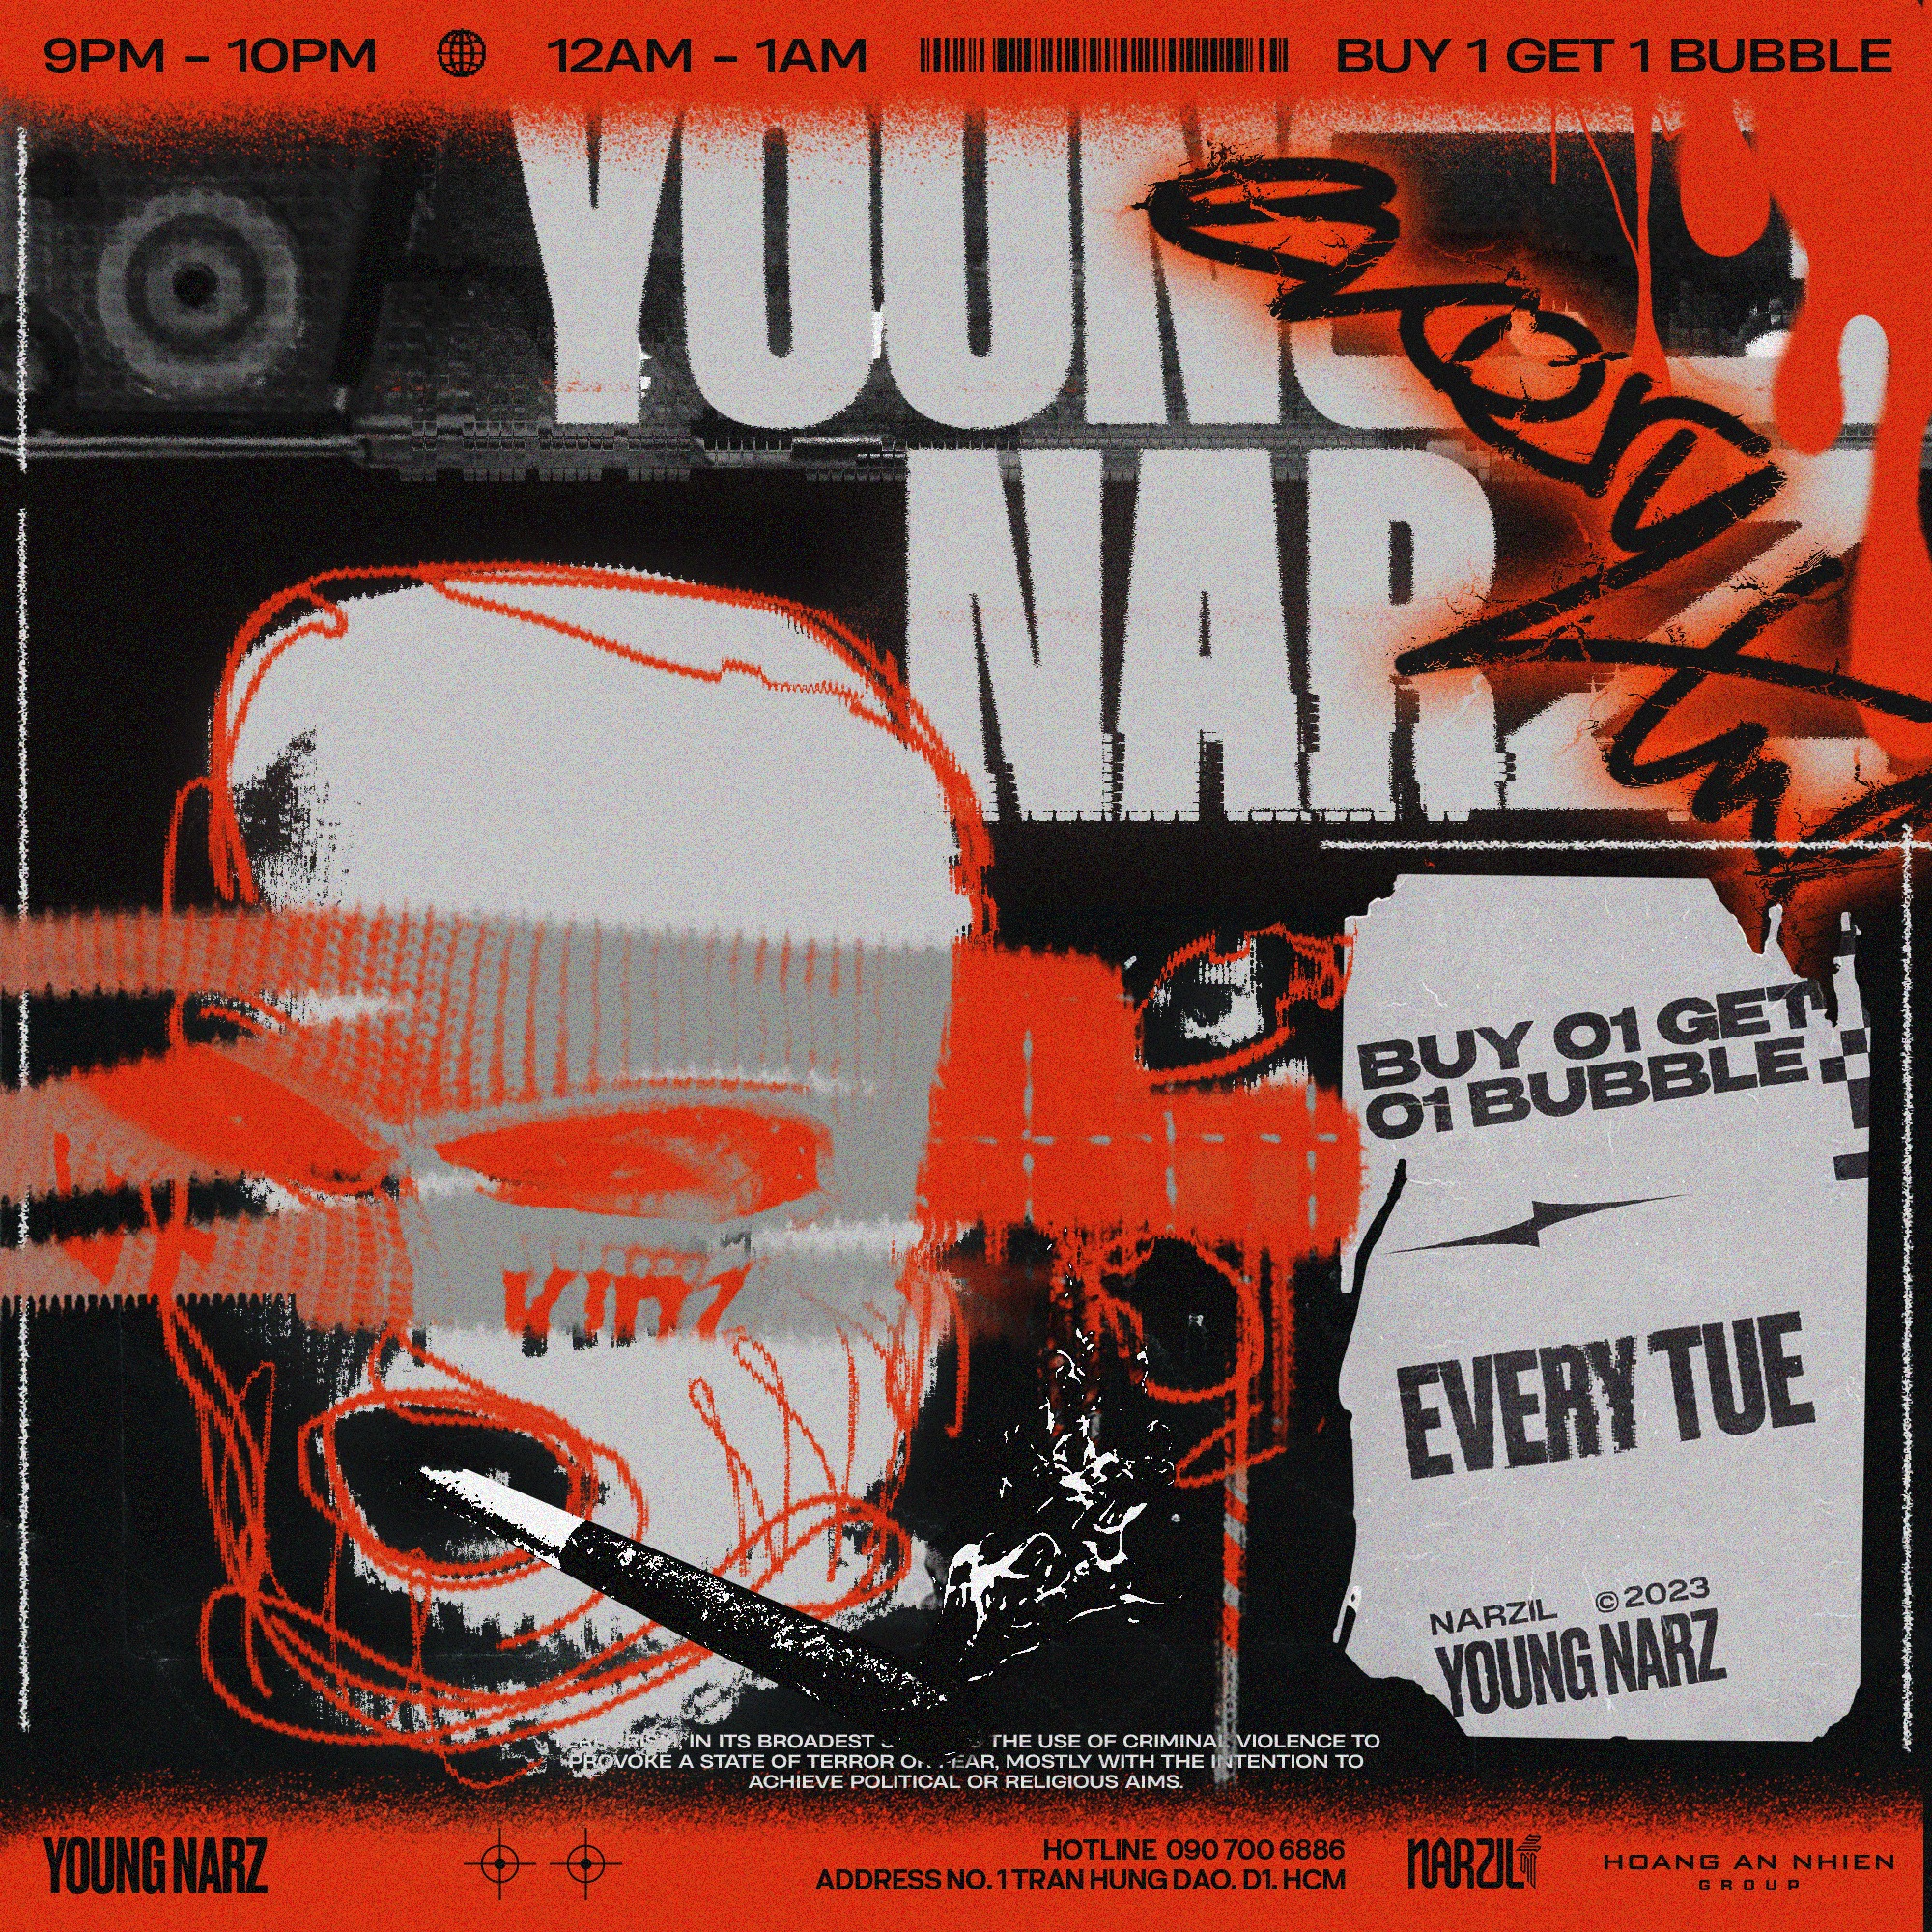 YOUNG NARZ | EVERY TUESDAY